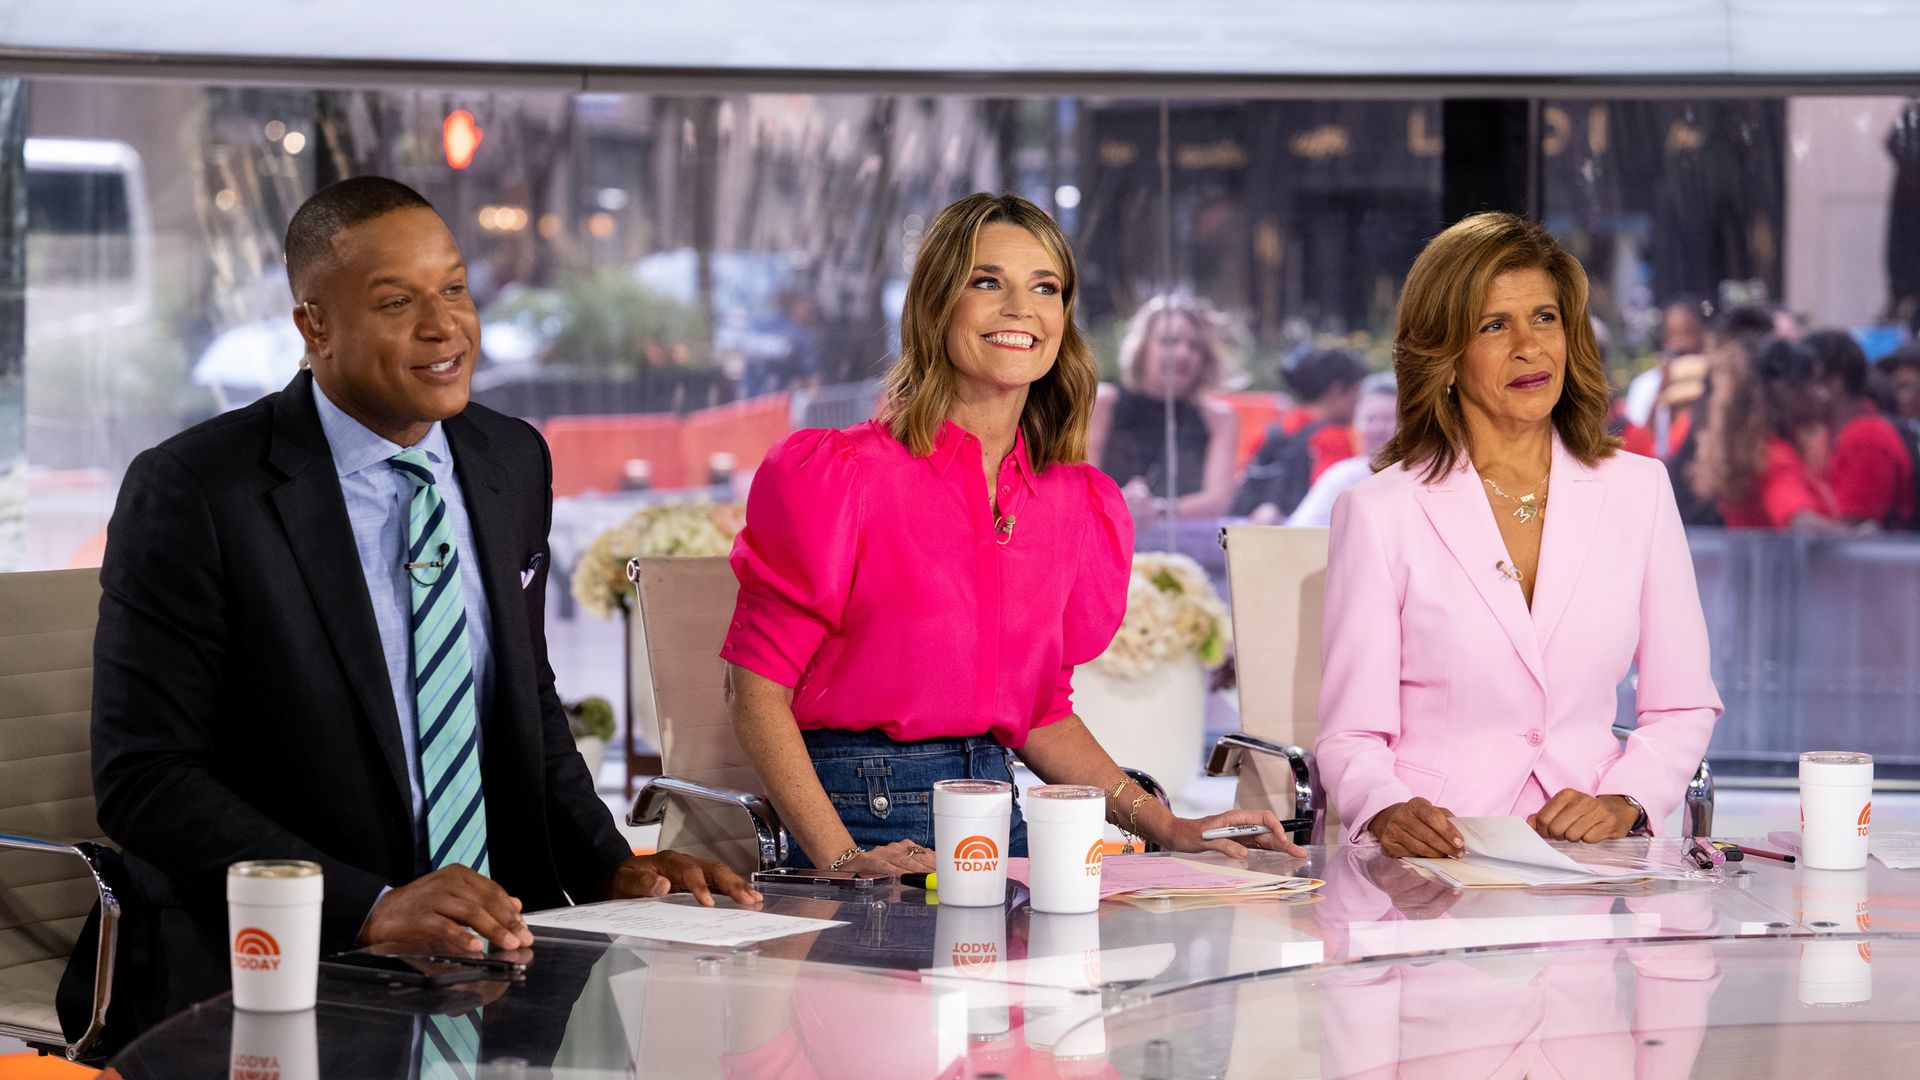 Craig Melvin stepped in to sub Savannah Guthrie on Wednesday's Today Show